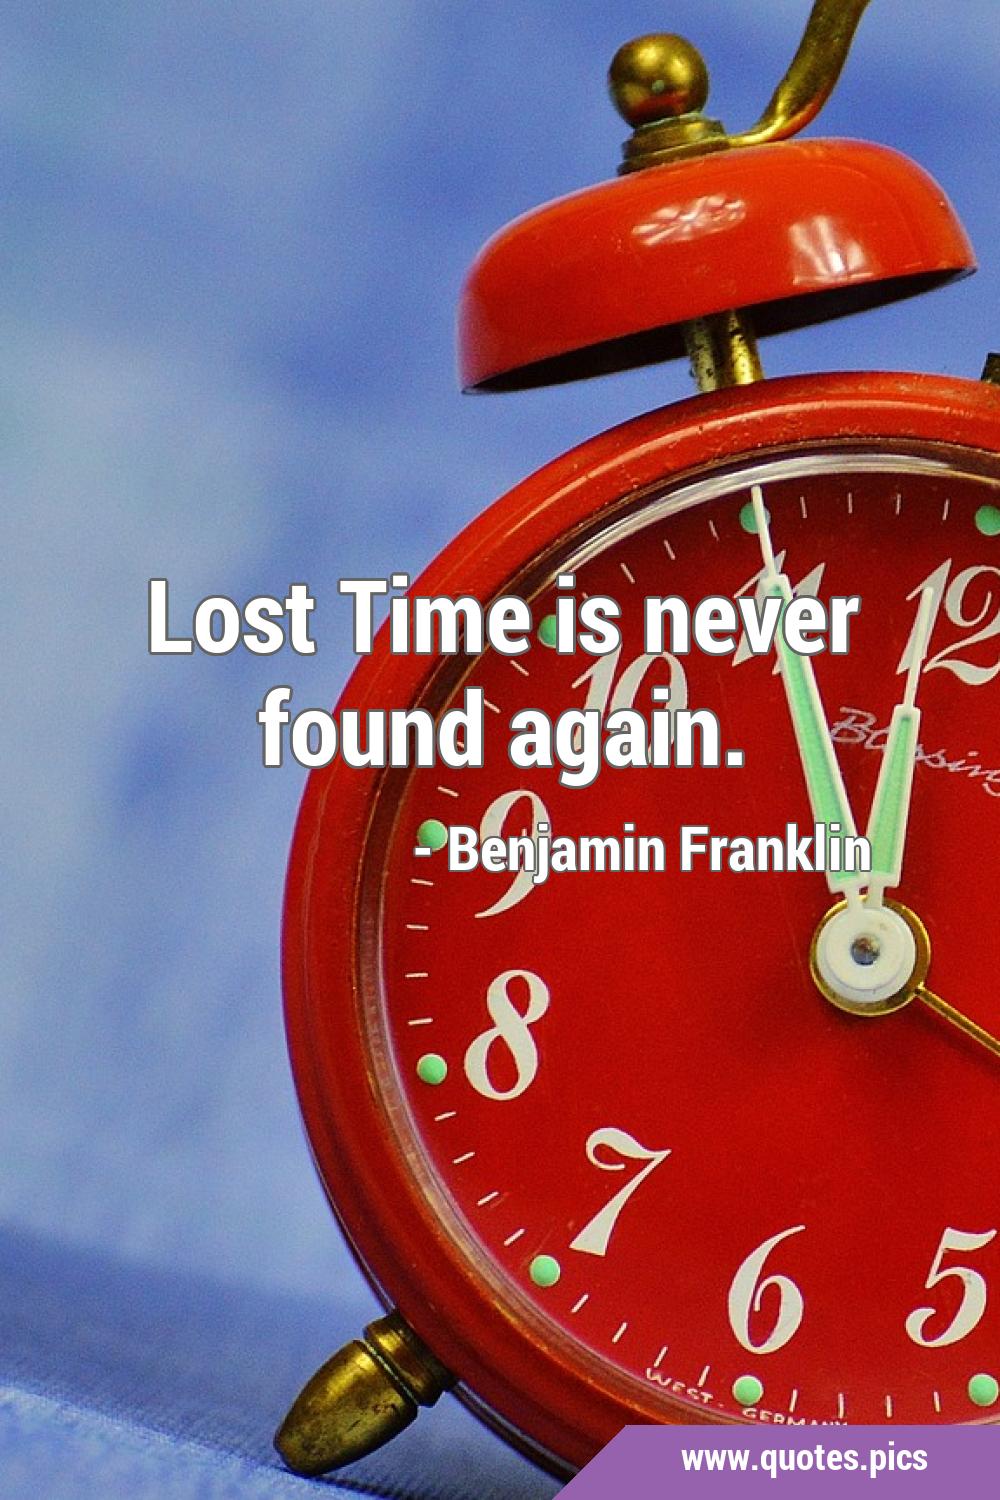 Lost Time is never found again.